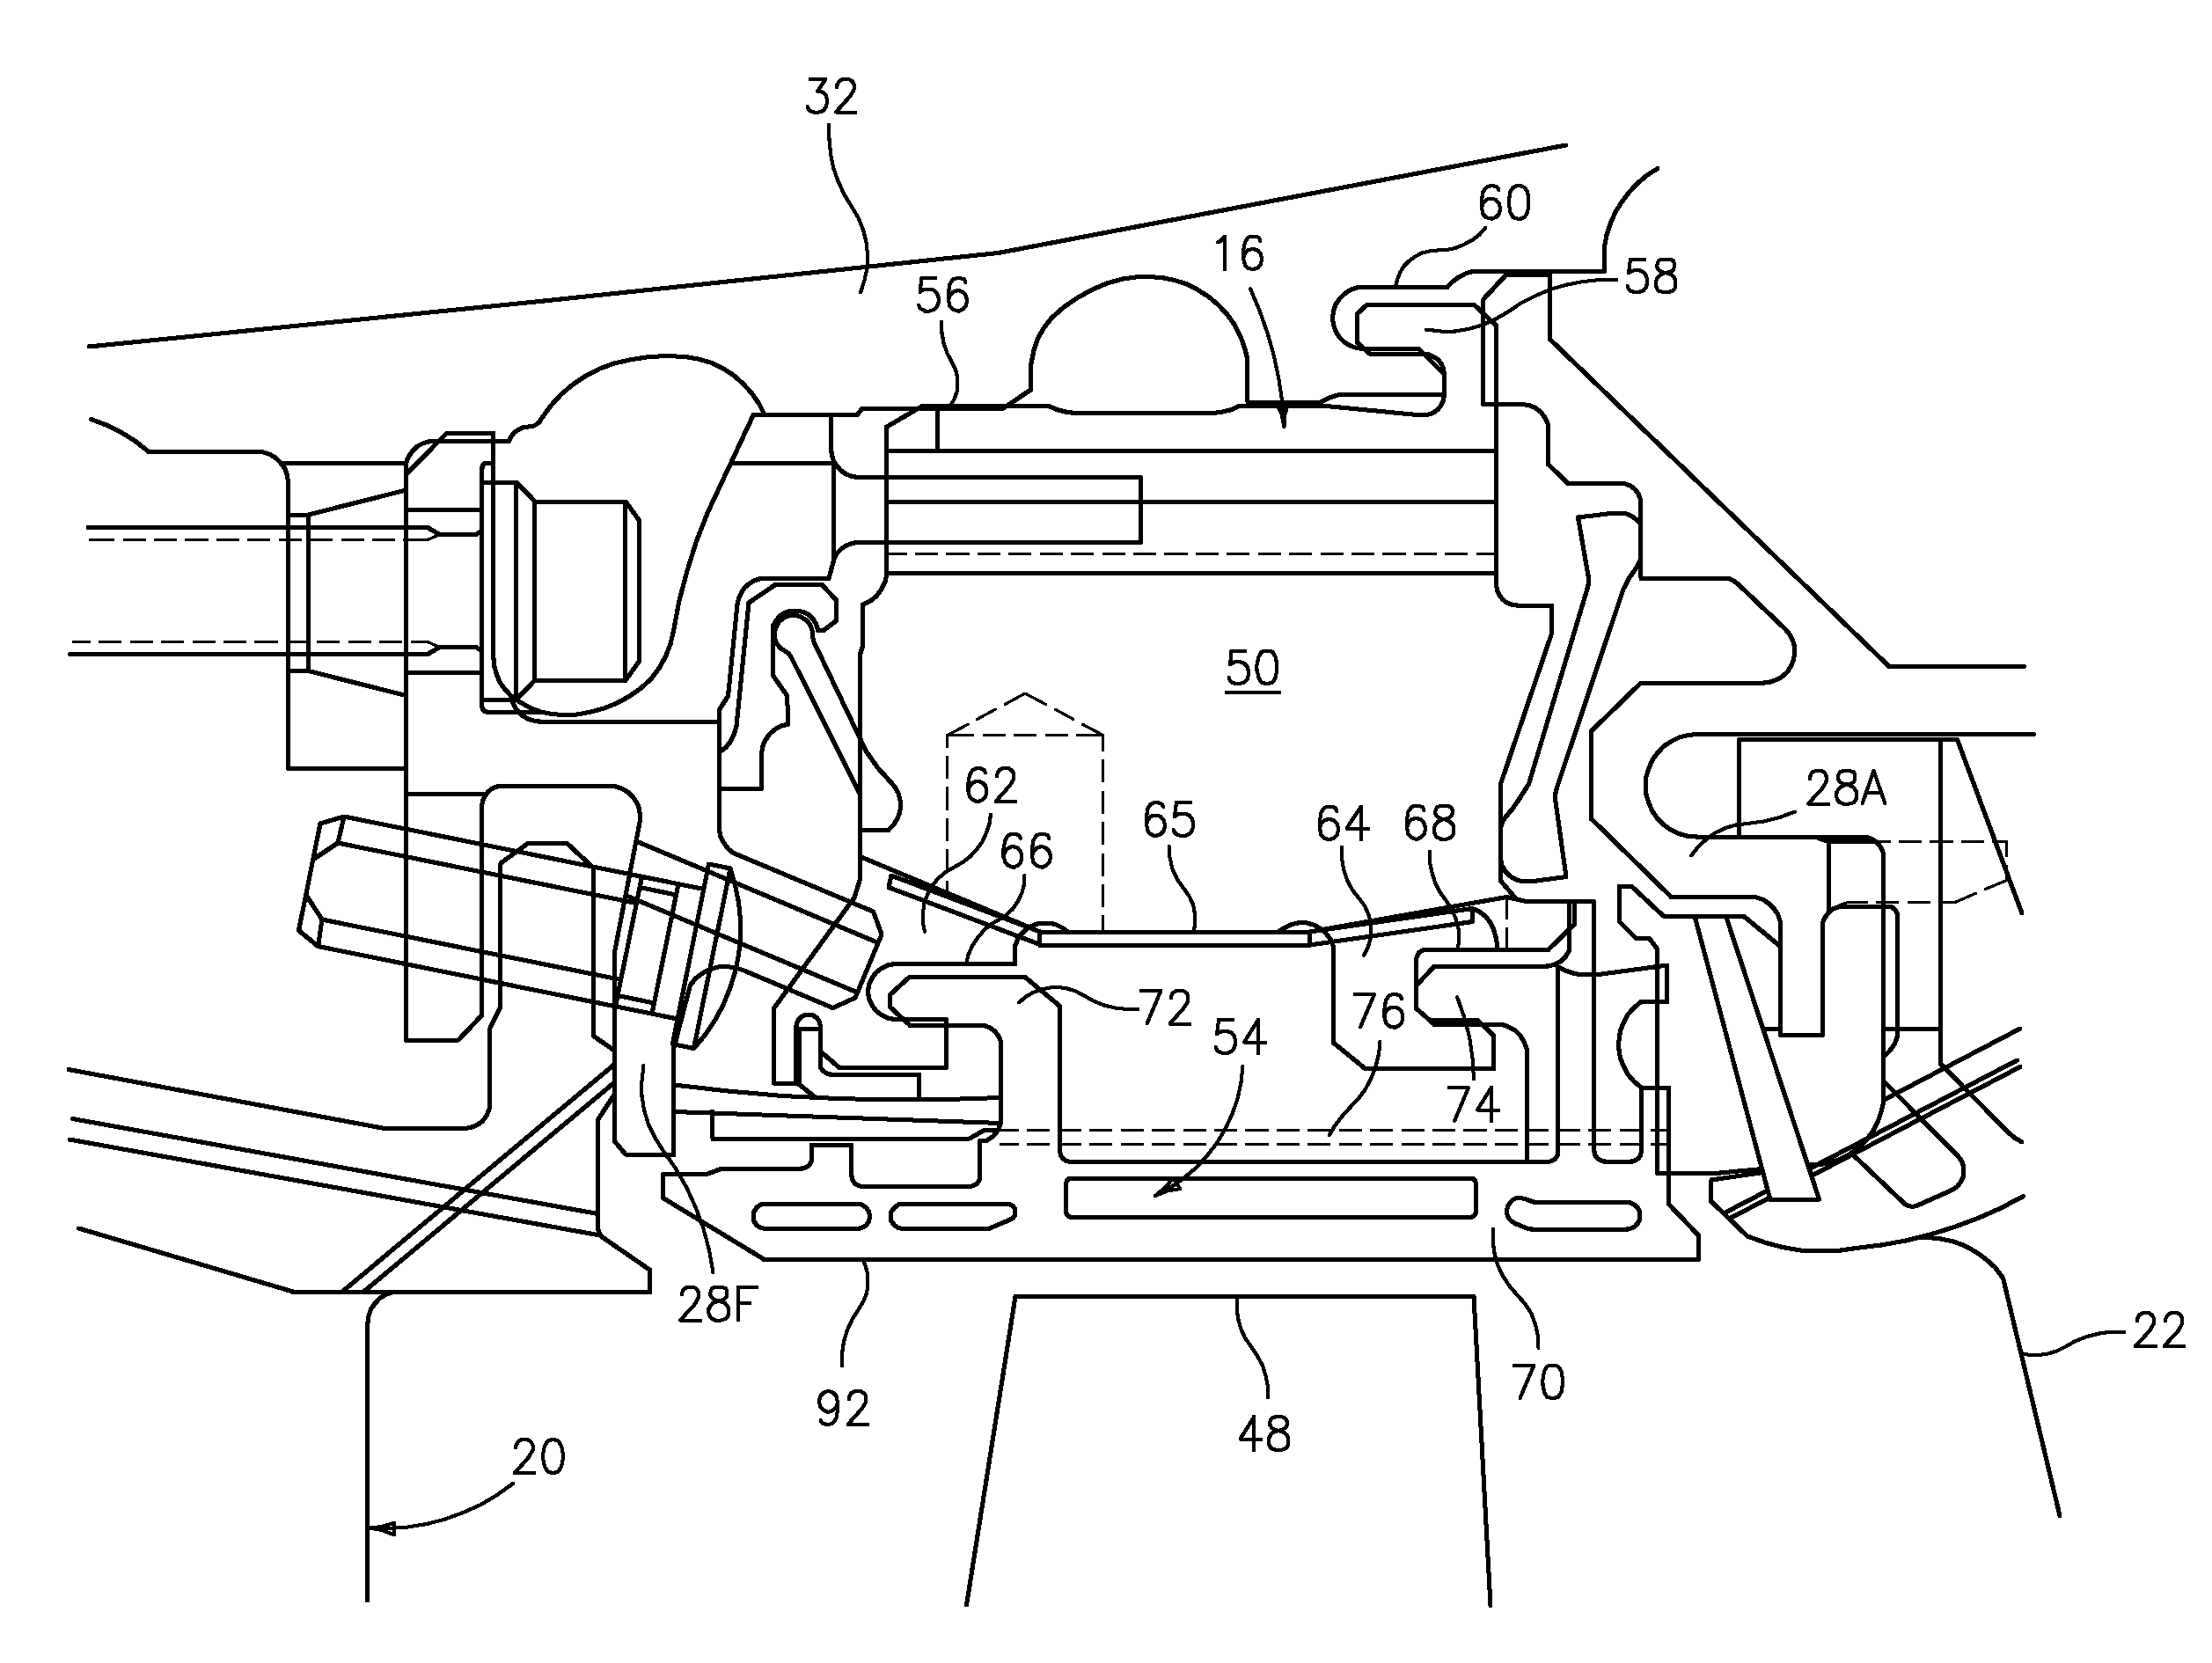 Blade outer air seal for a gas turbine engine